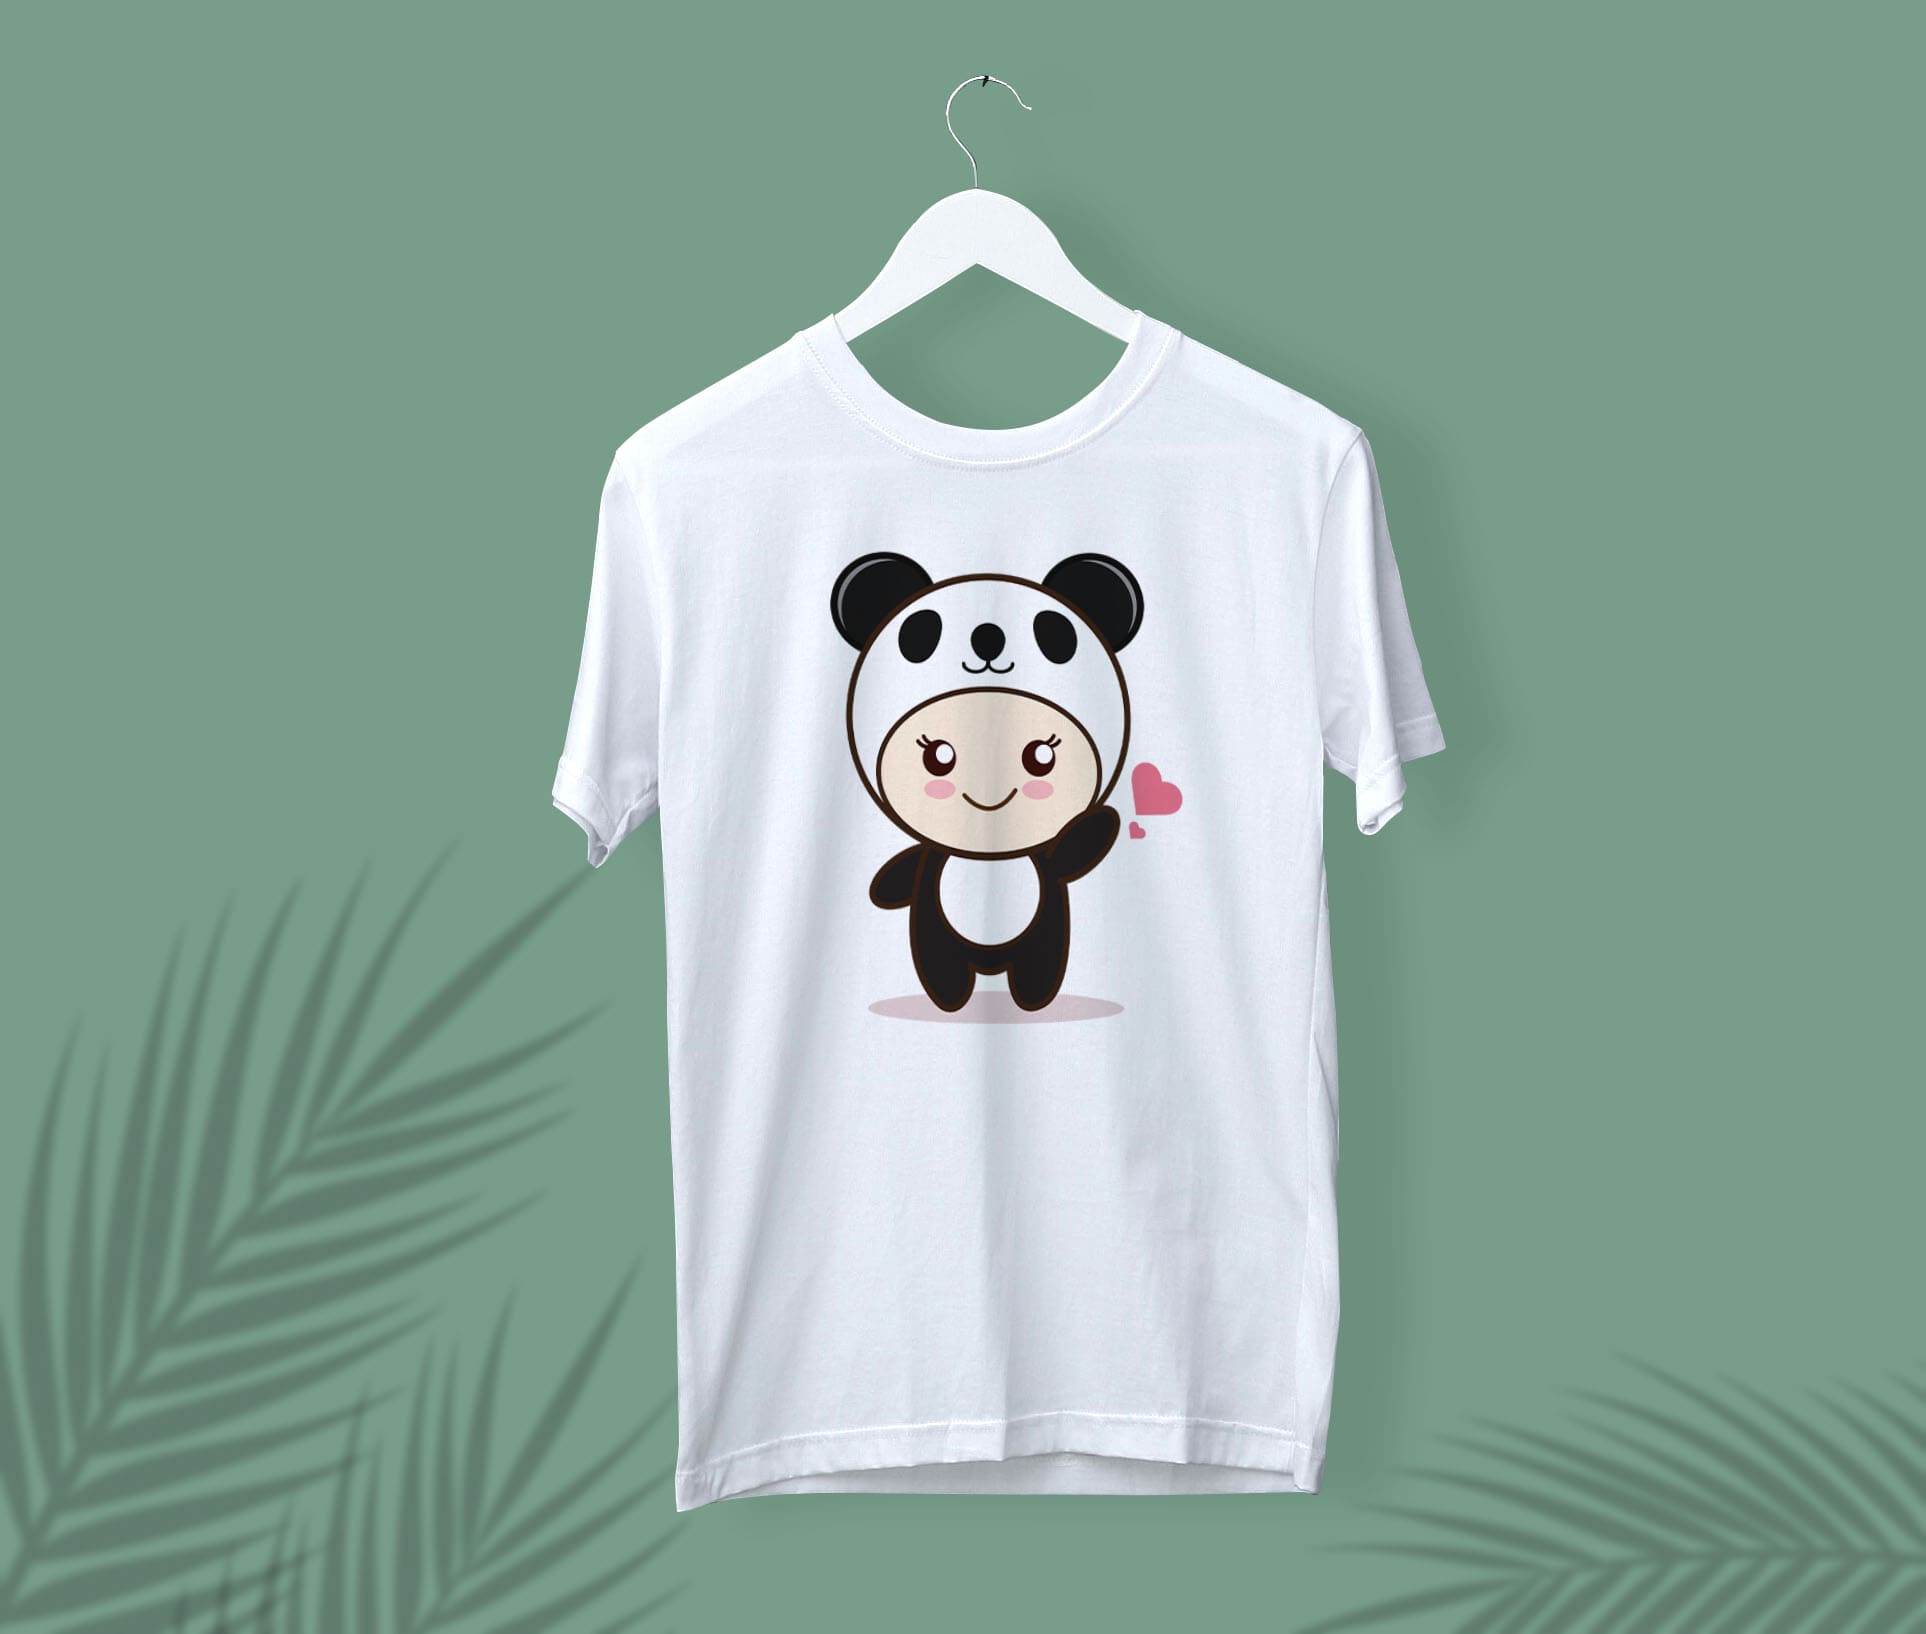 White t-shirt with a enamored girl panda on a white hanger on a turquoise background.